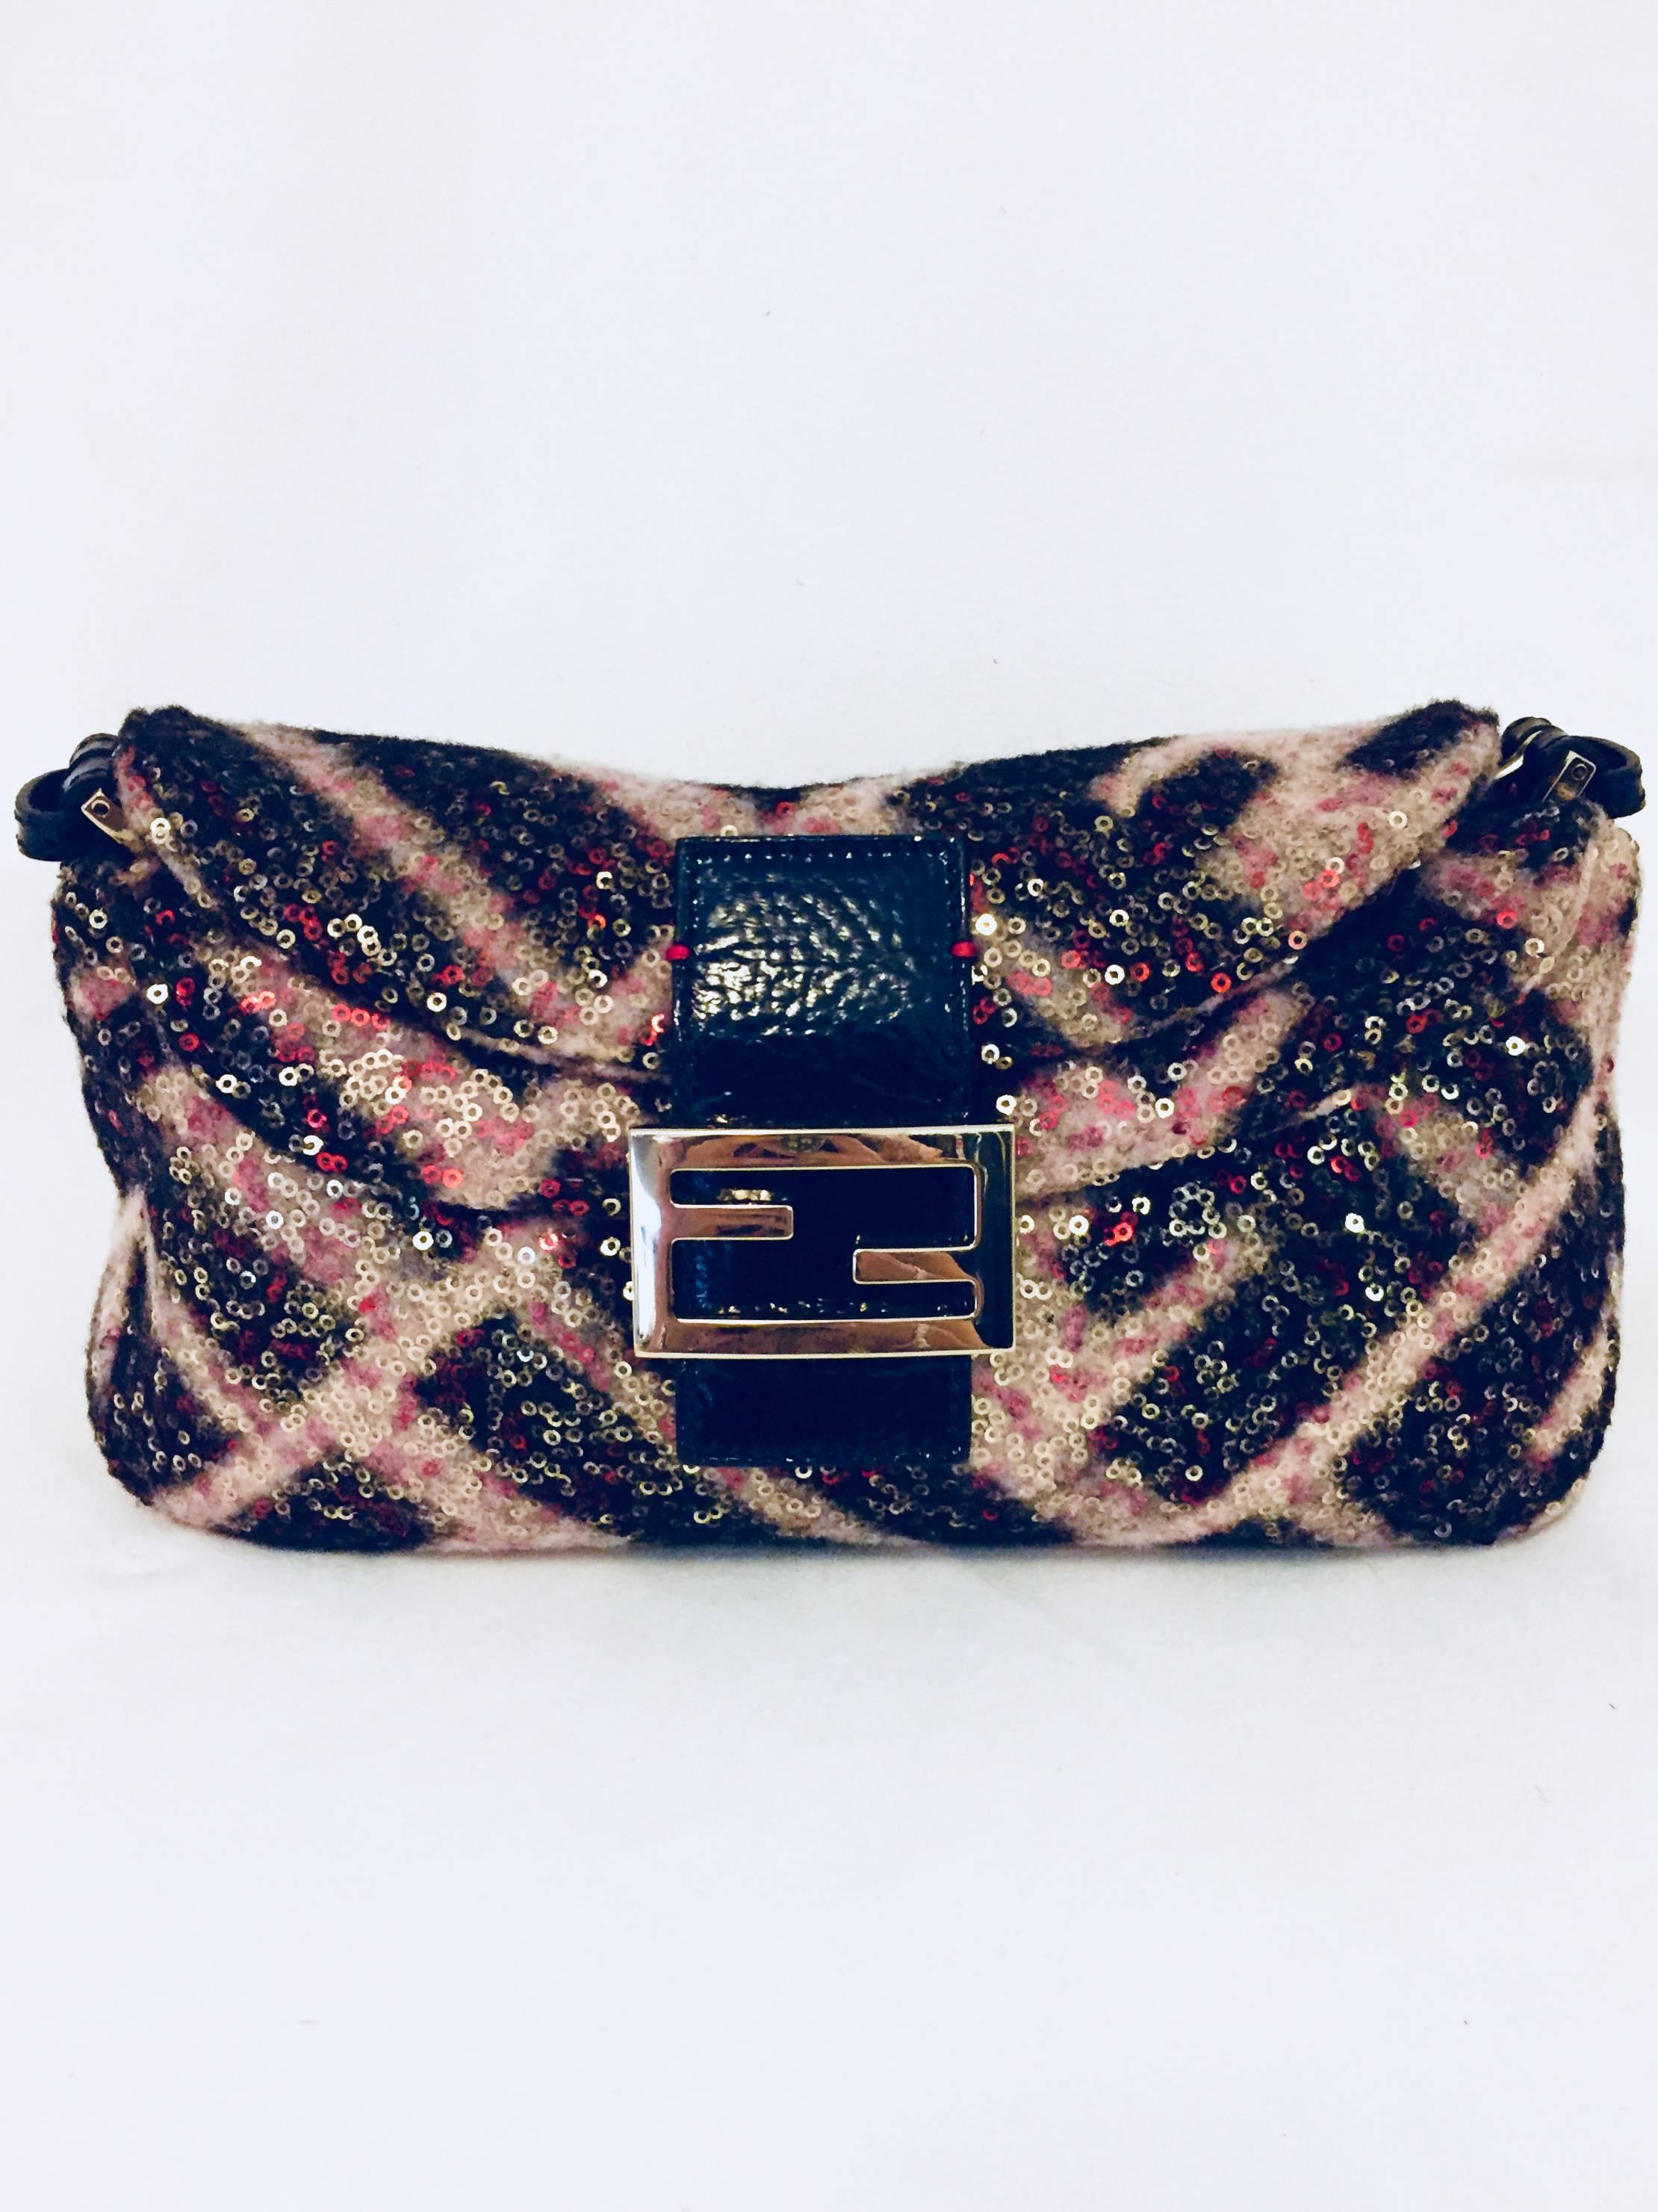 This Fendi multi color wool baguette bag covered in gold tone and red sequins on the exterior can be worn daytime or nighttime.  The two flaps fully open and the top flap contains the iconic double F logo with hidden magnet snap closure.  The